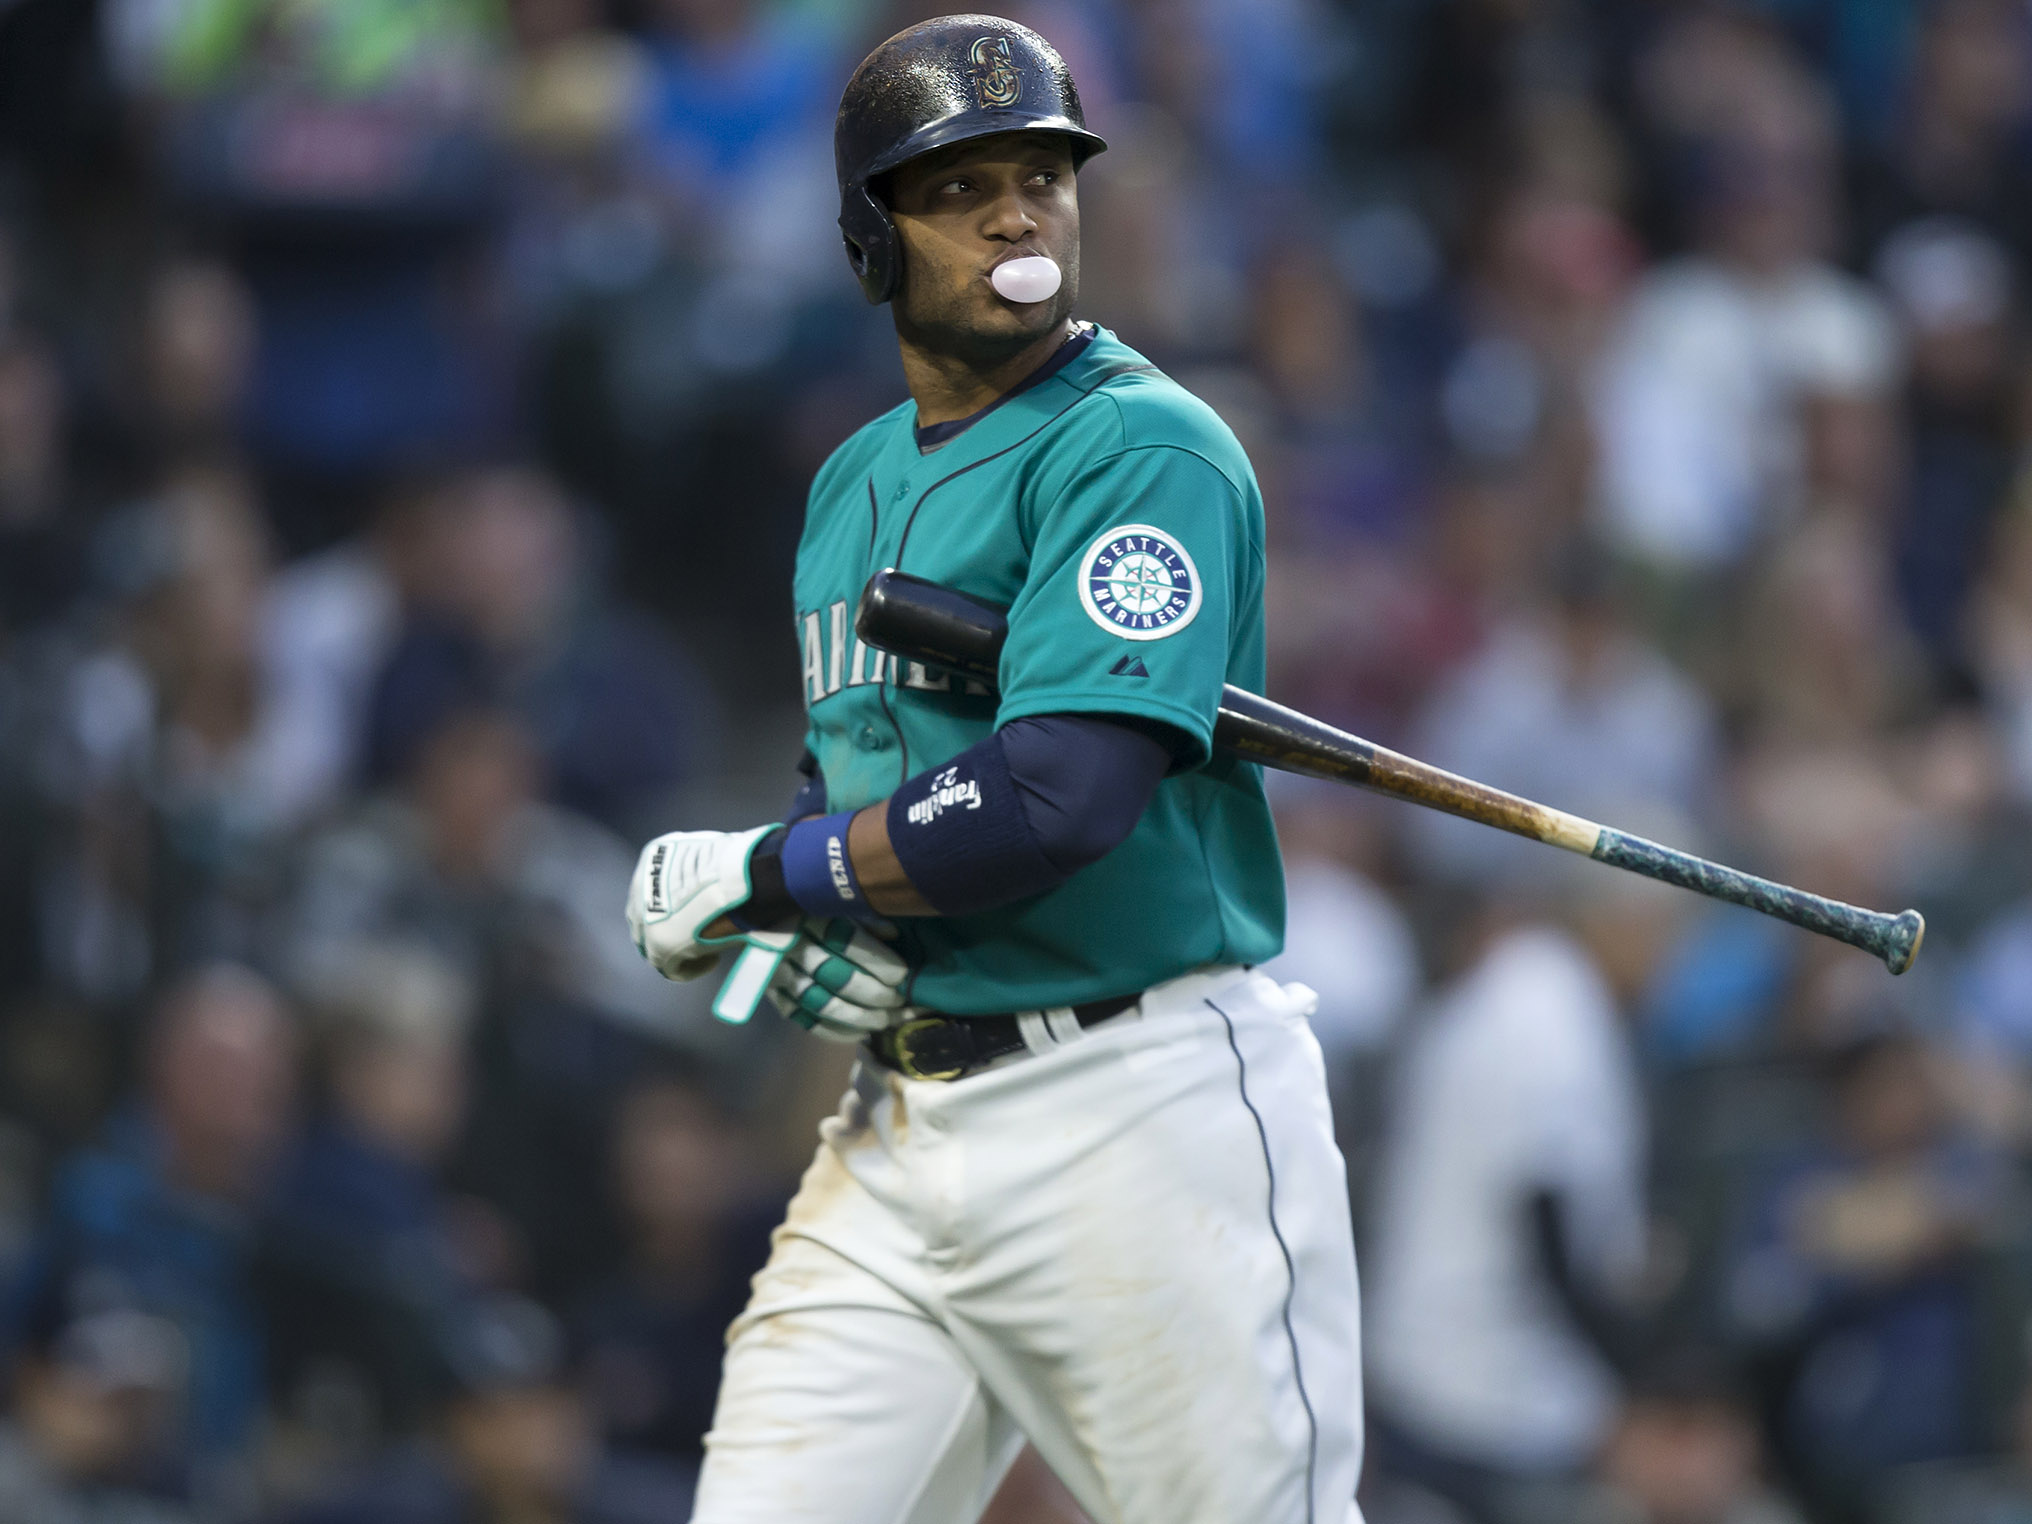 Seattle Mariners: 2B Robinson Cano ripped by ex-coach - Sports